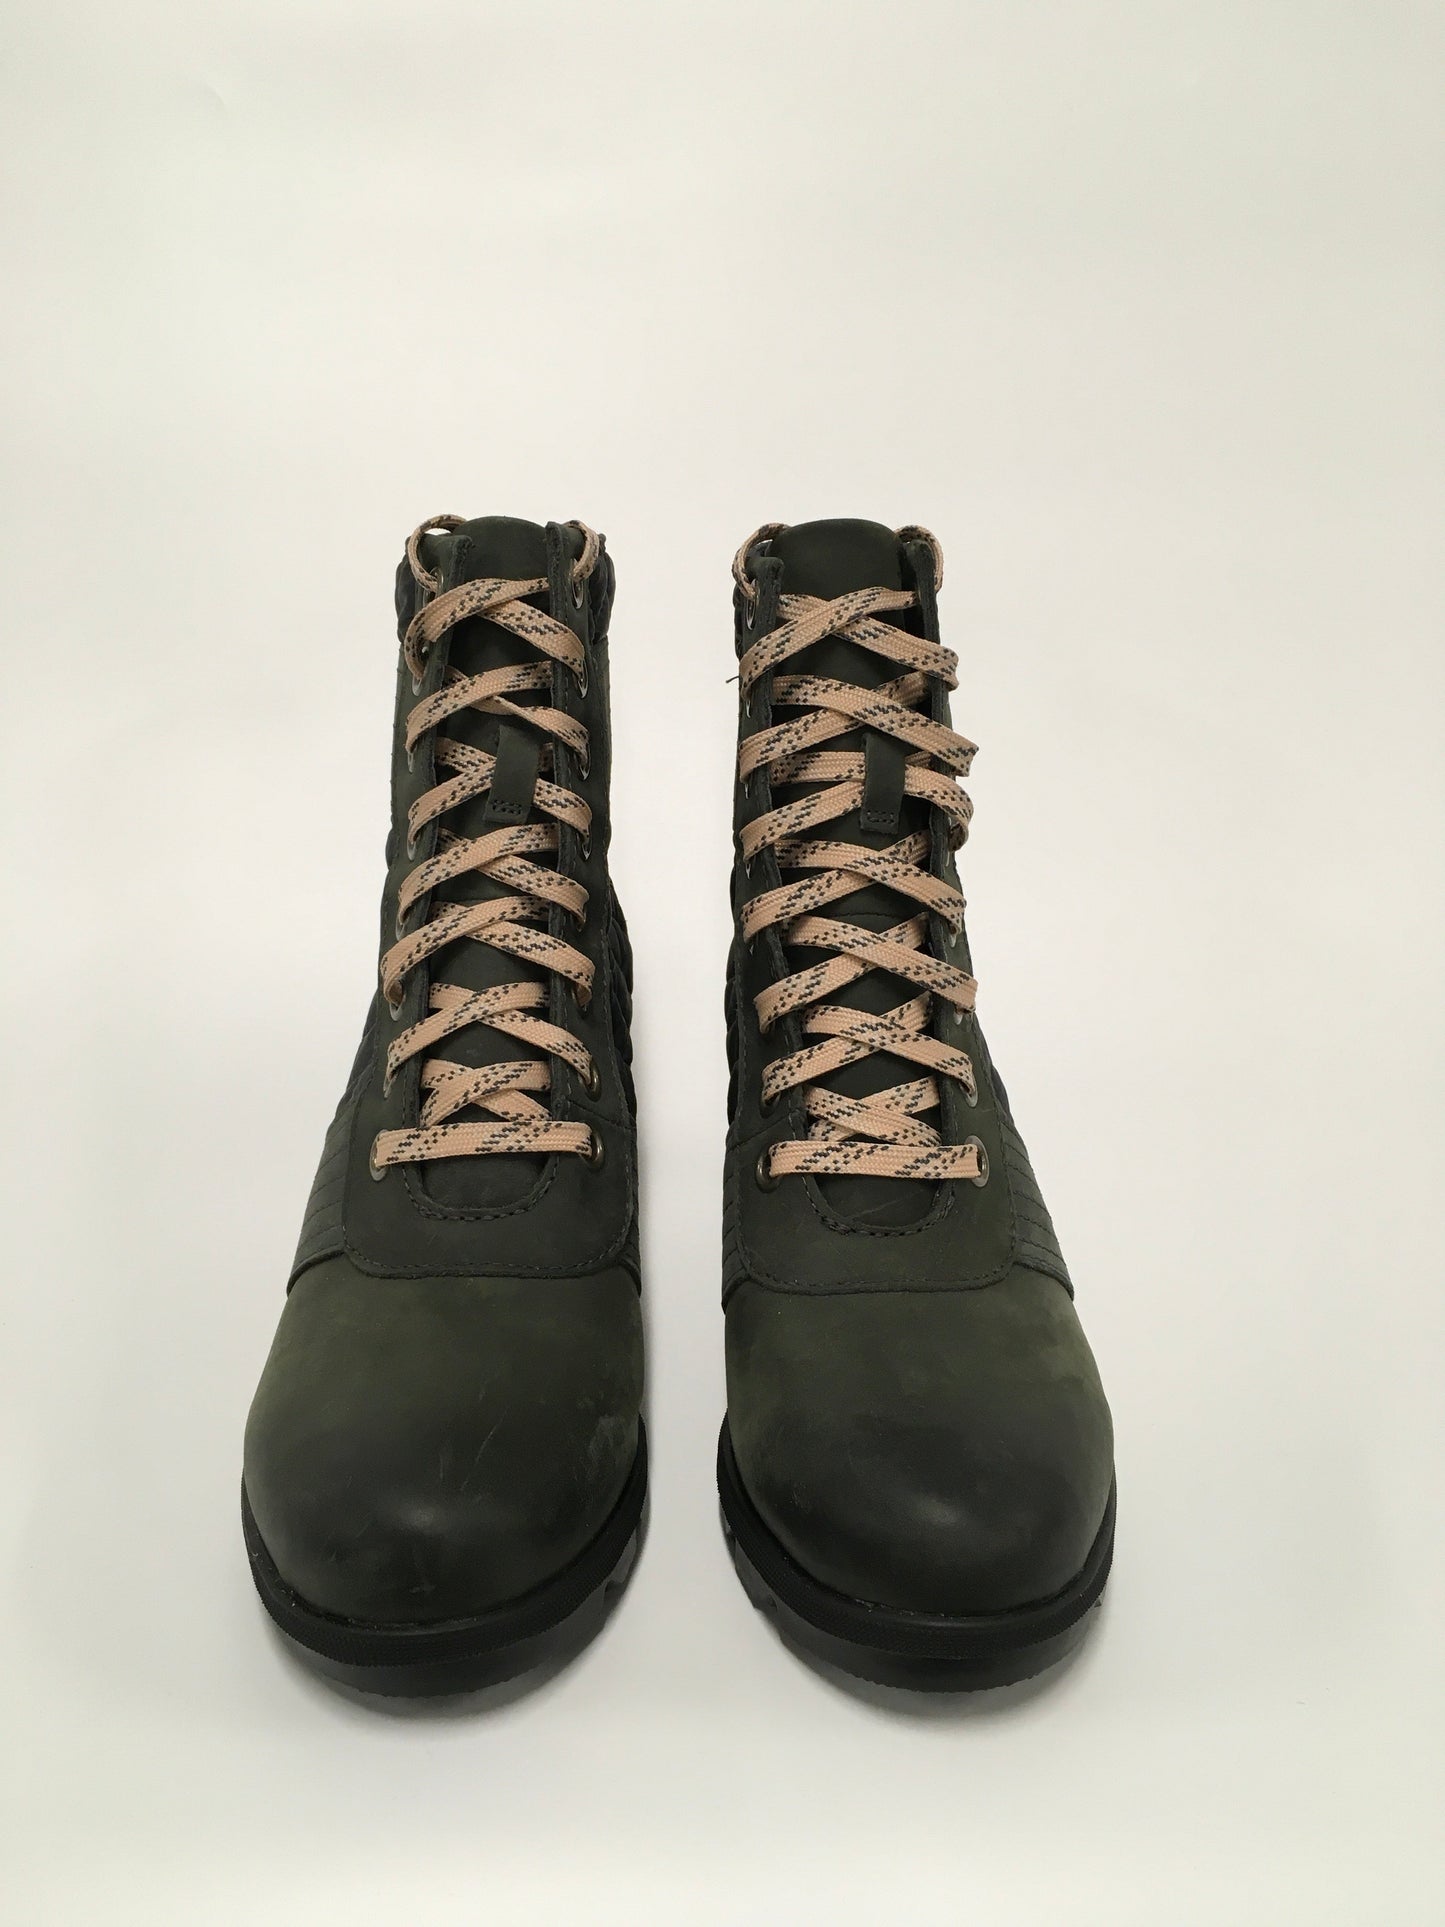 Boots Ankle Heels By Sorel  Size: 9